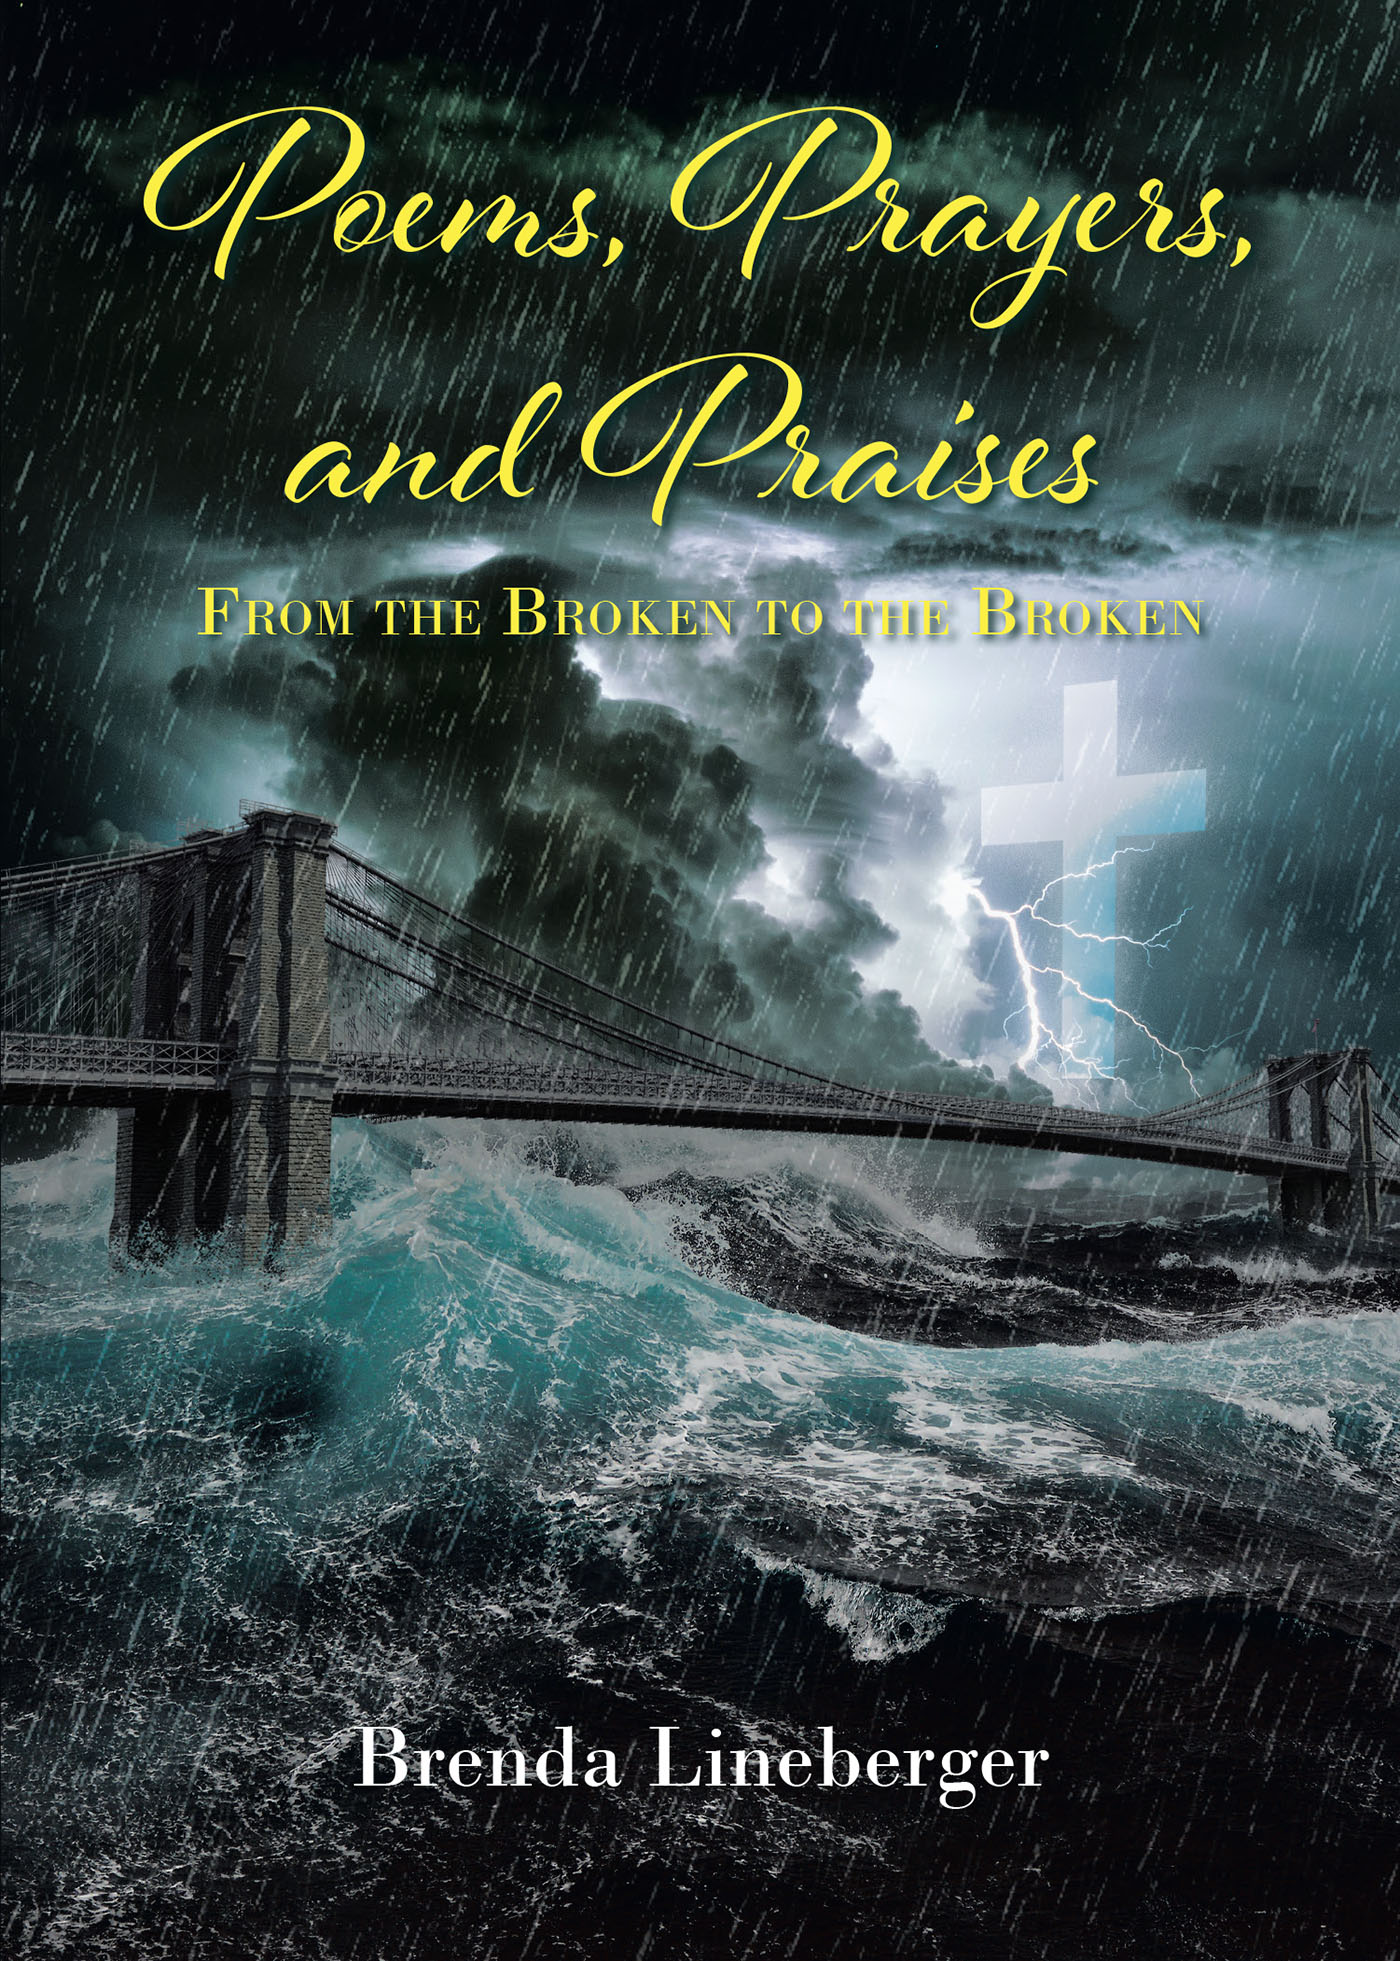 Brenda Lineberger’s Newly Released "Poems, Prayers, and Praises: From the Broken to the Broken" is a Heartfelt Collection of Writings Meant to Uplift